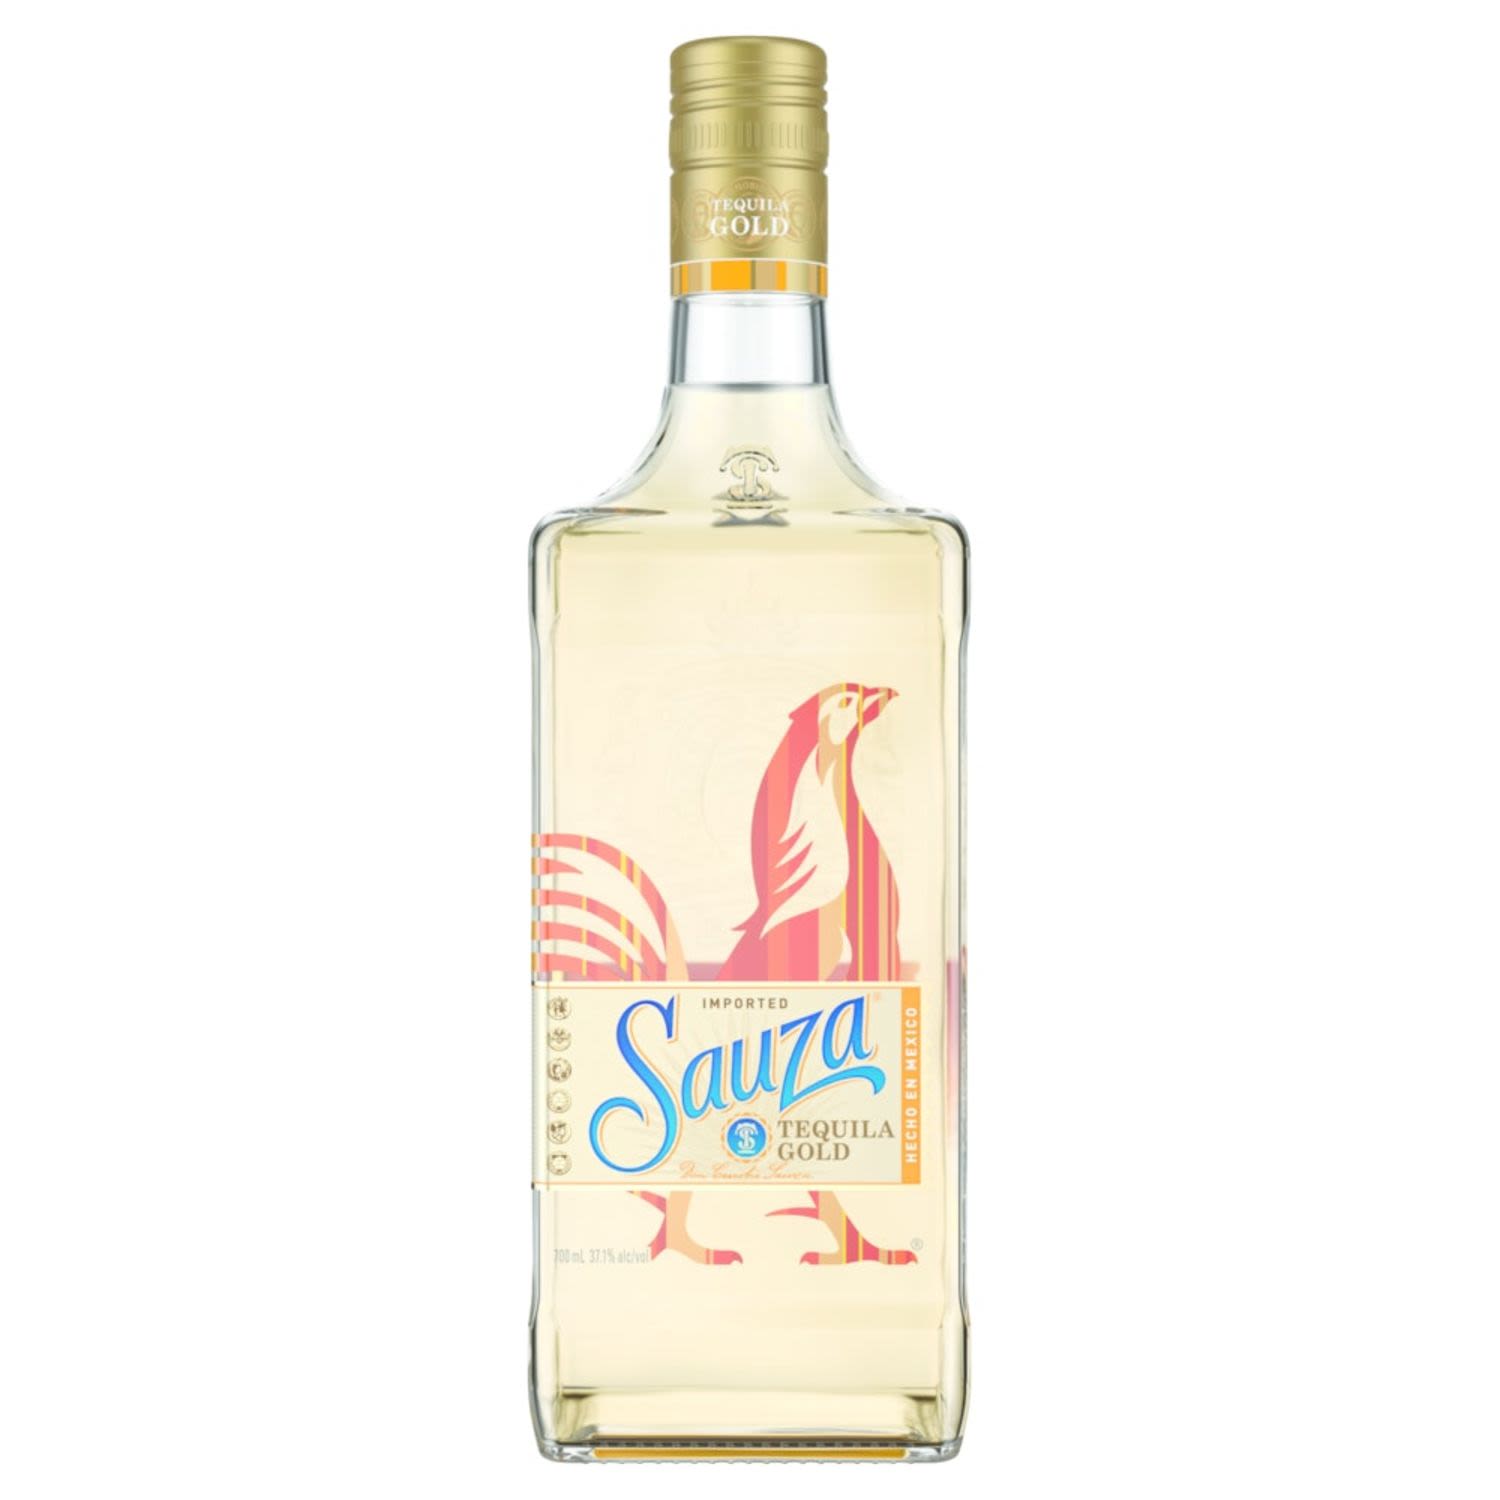 In every sip of Sauza® Gold, you’ll find the fresh agave taste you expect, plus an extra hint of cooked agave and vanilla.<br /> <br />Alcohol Volume: 37.10%<br /><br />Pack Format: Bottle<br /><br />Standard Drinks: 20.5</br /><br />Pack Type: Bottle<br />